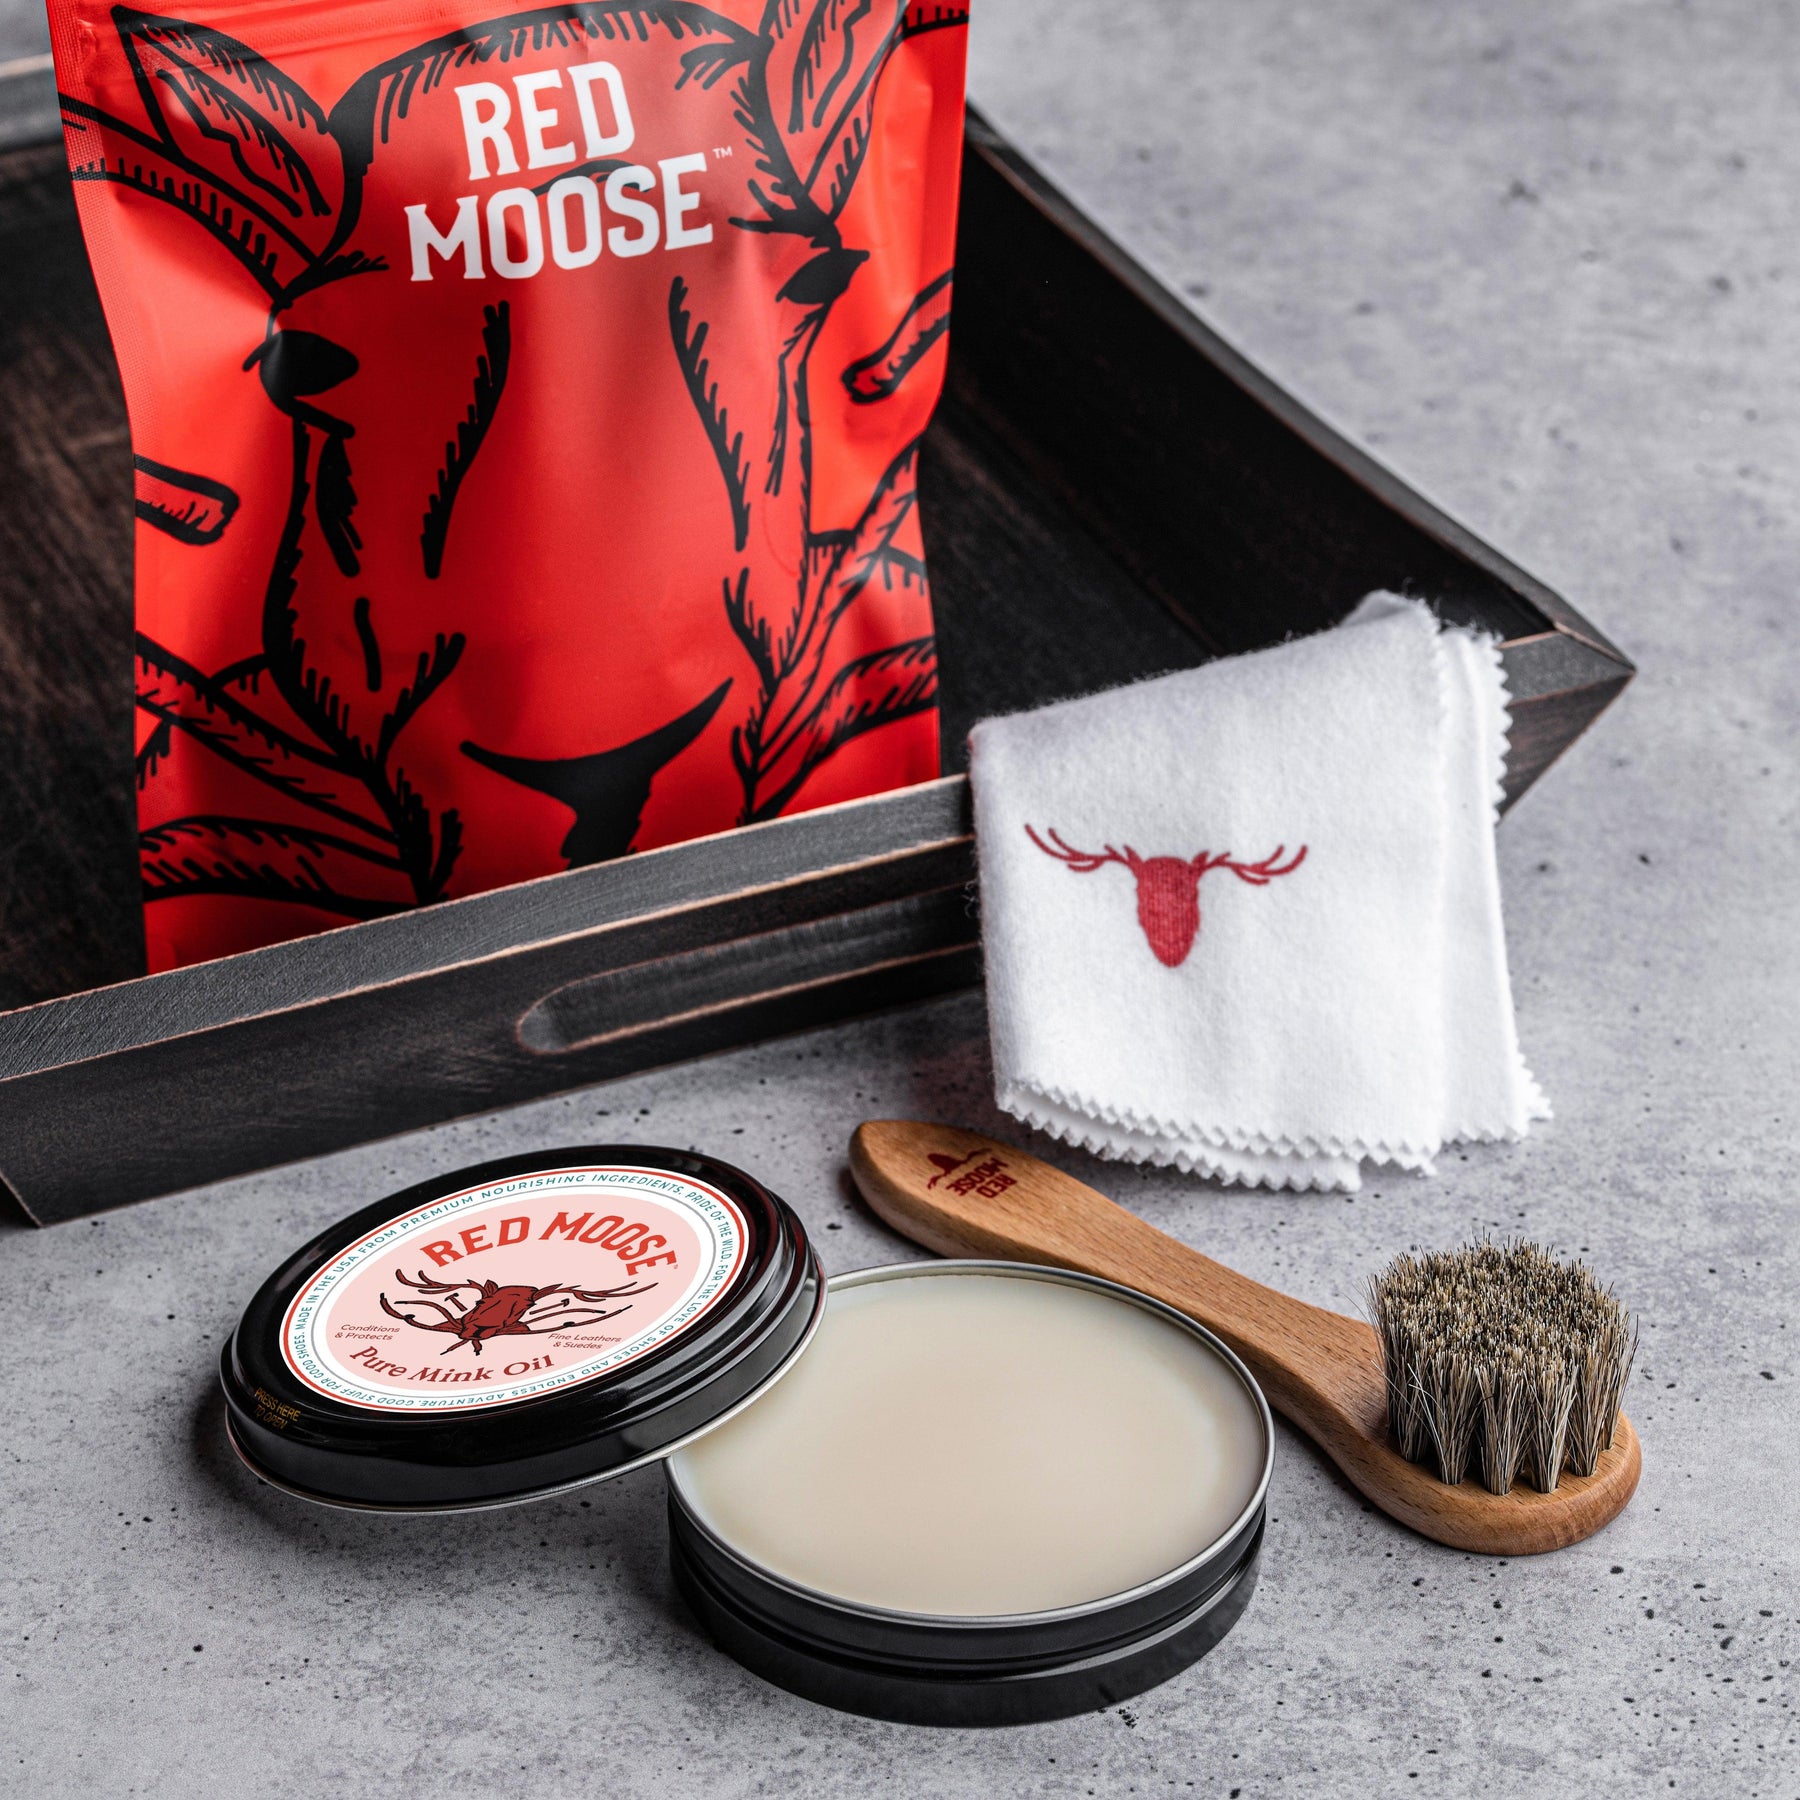 Red Moose Boots and Shoe Cream - Shoes Handbag Wallet Leather